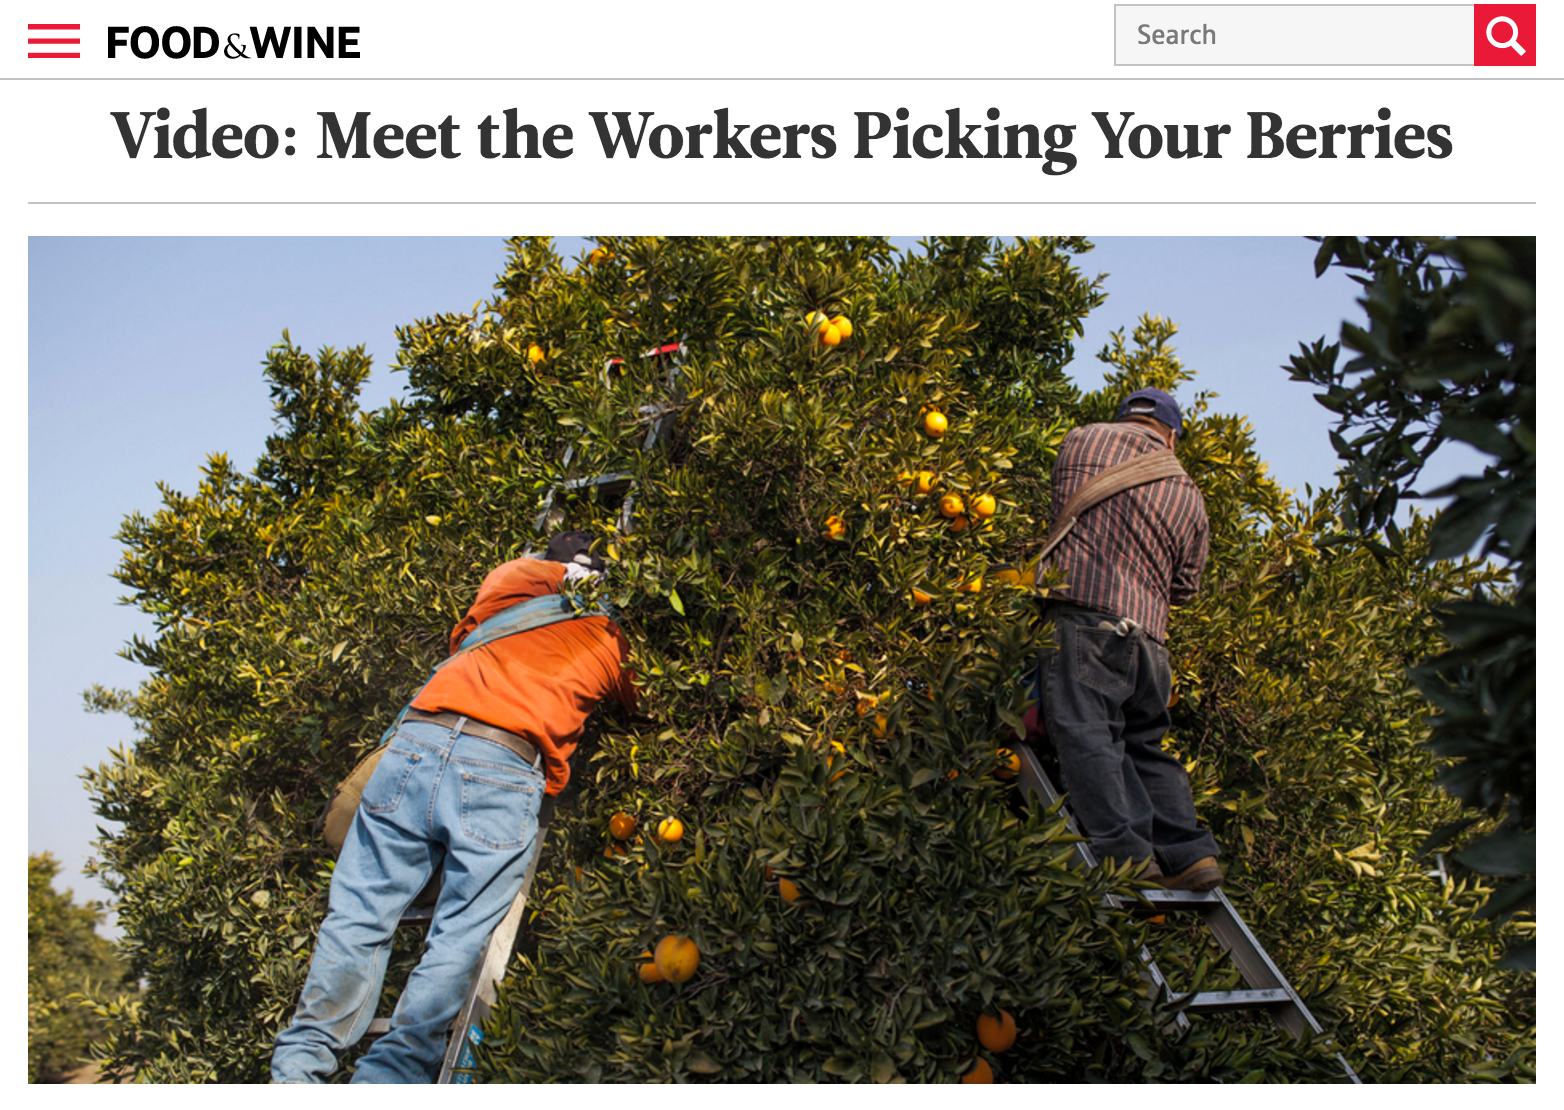 Food & Wine: Meet the Workers Picking Your Berries